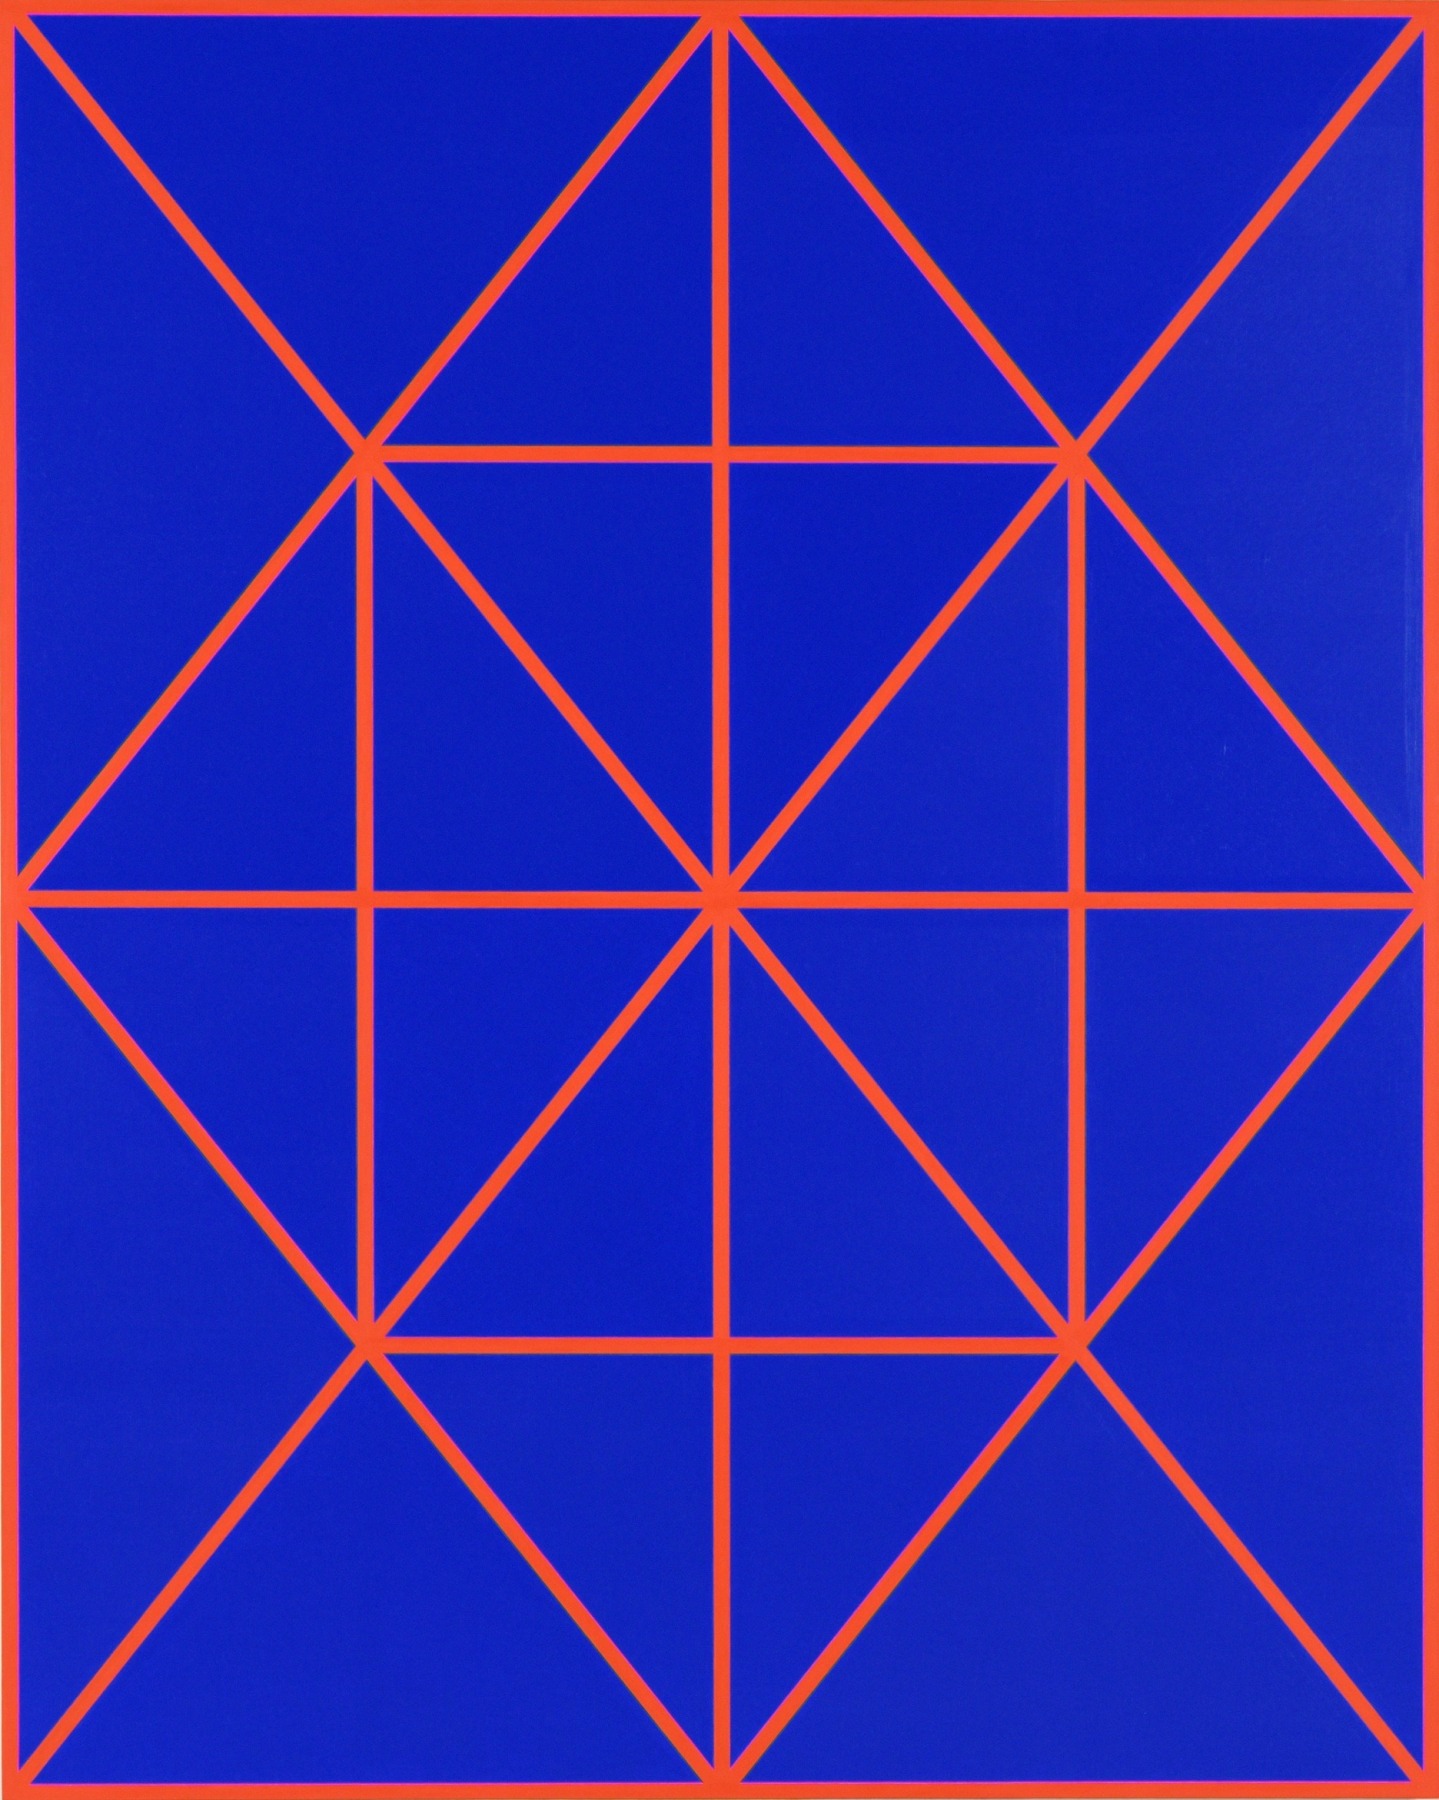 Cary Smith, Complex Diagonals #8 (blue-red), 2017